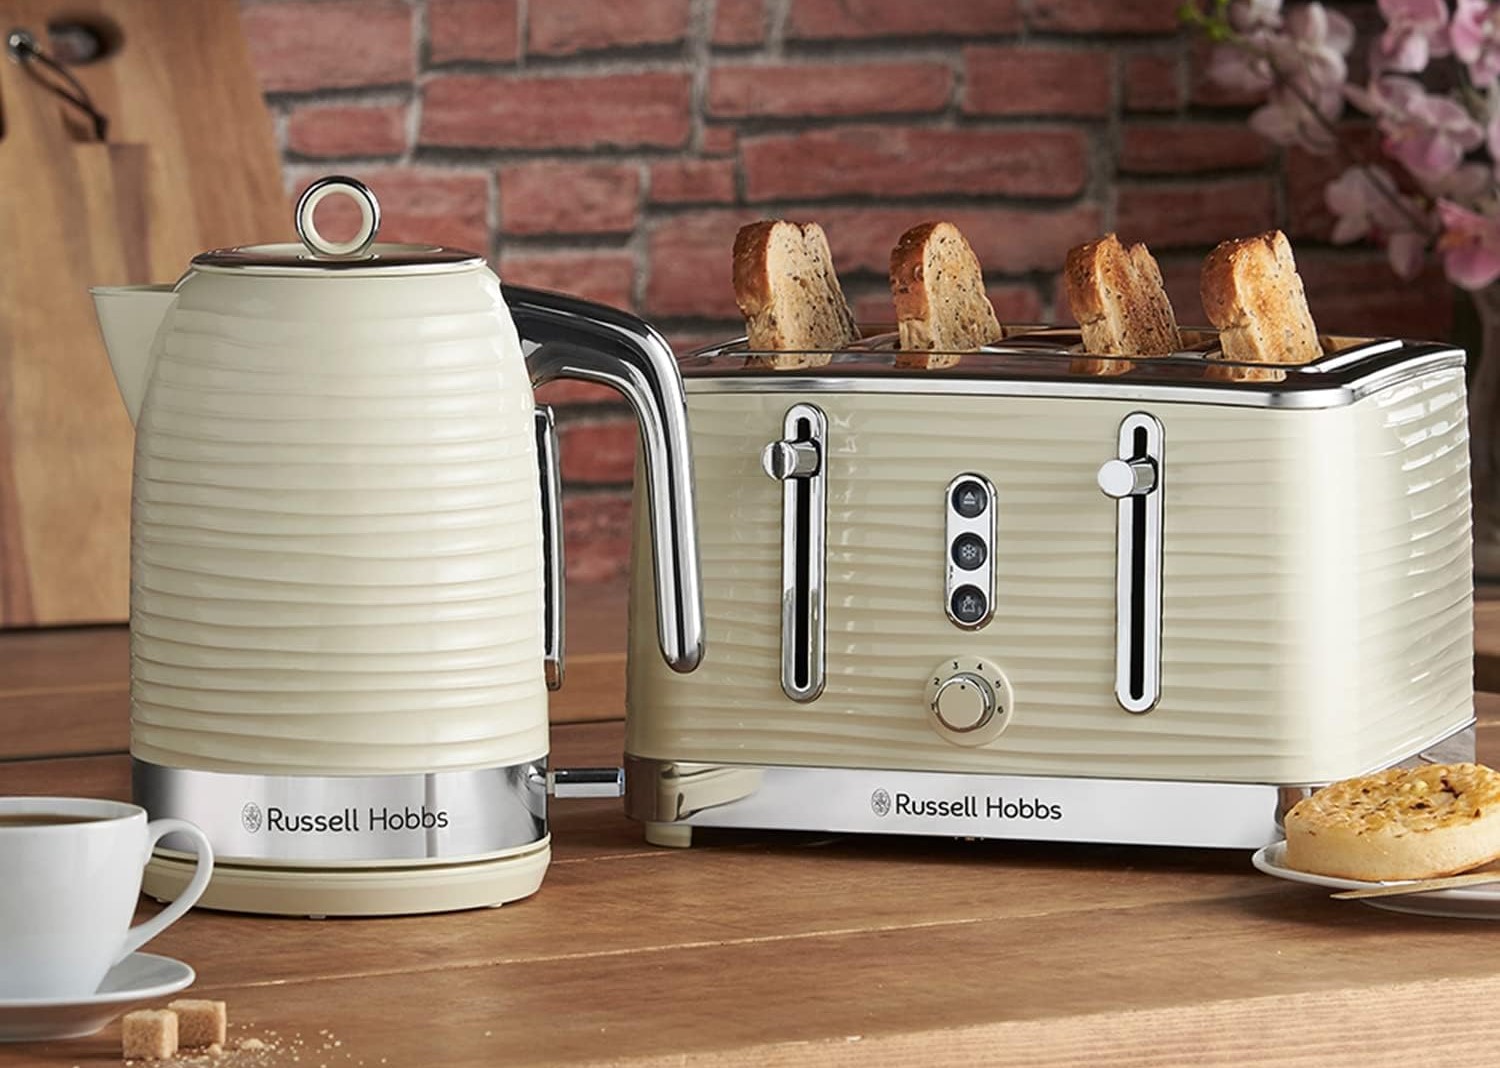 https://storables.com/wp-content/uploads/2023/08/9-amazing-russell-hobbs-toaster-for-2023-1691069193.jpg